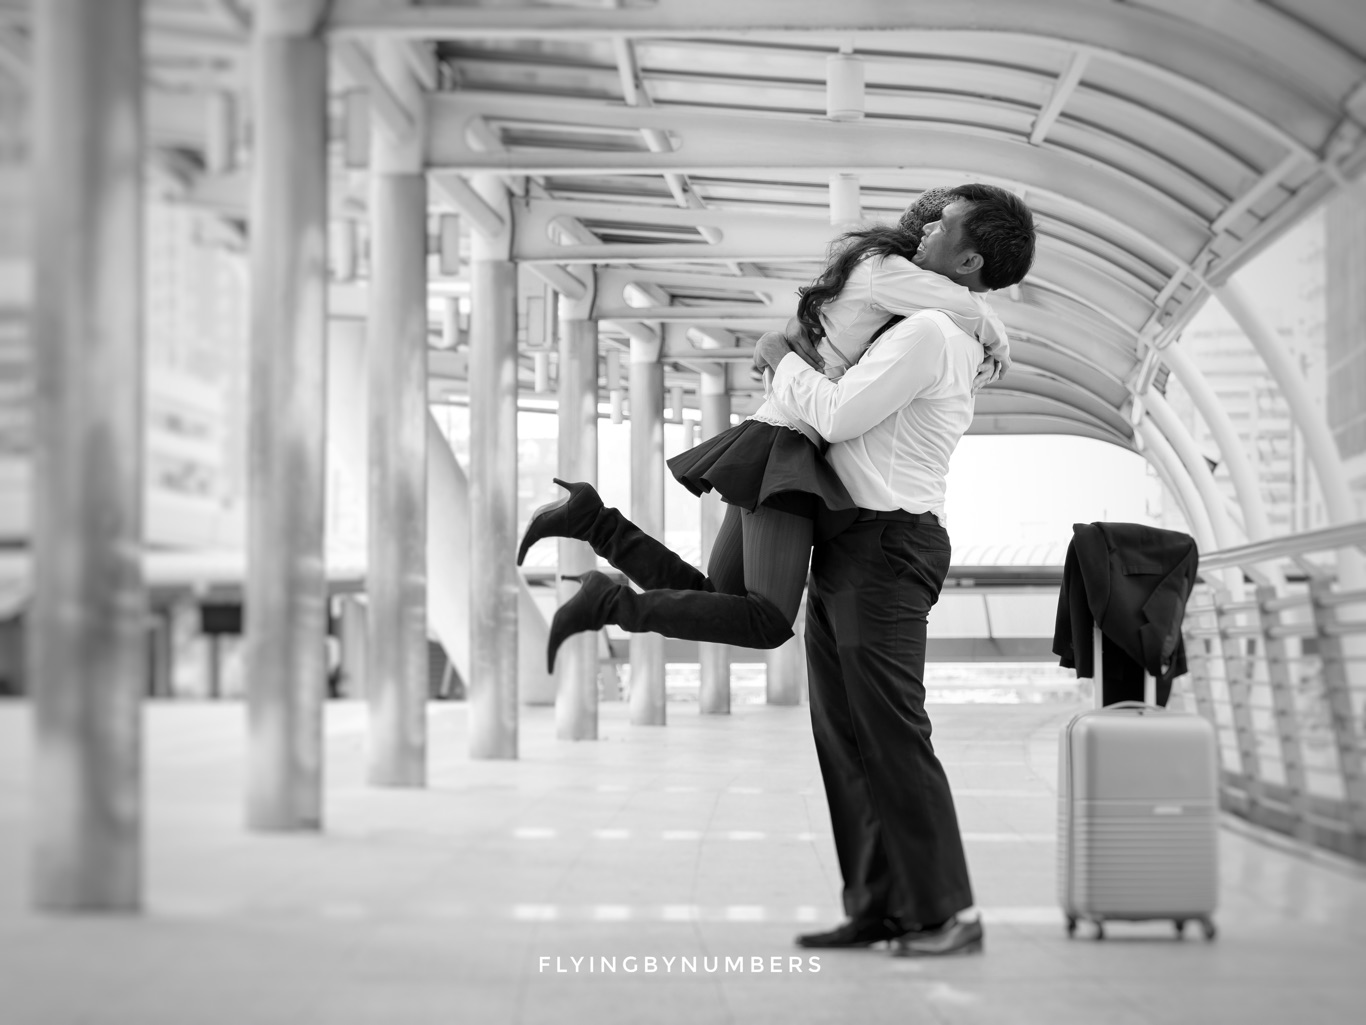 Couple embrace each other at airport